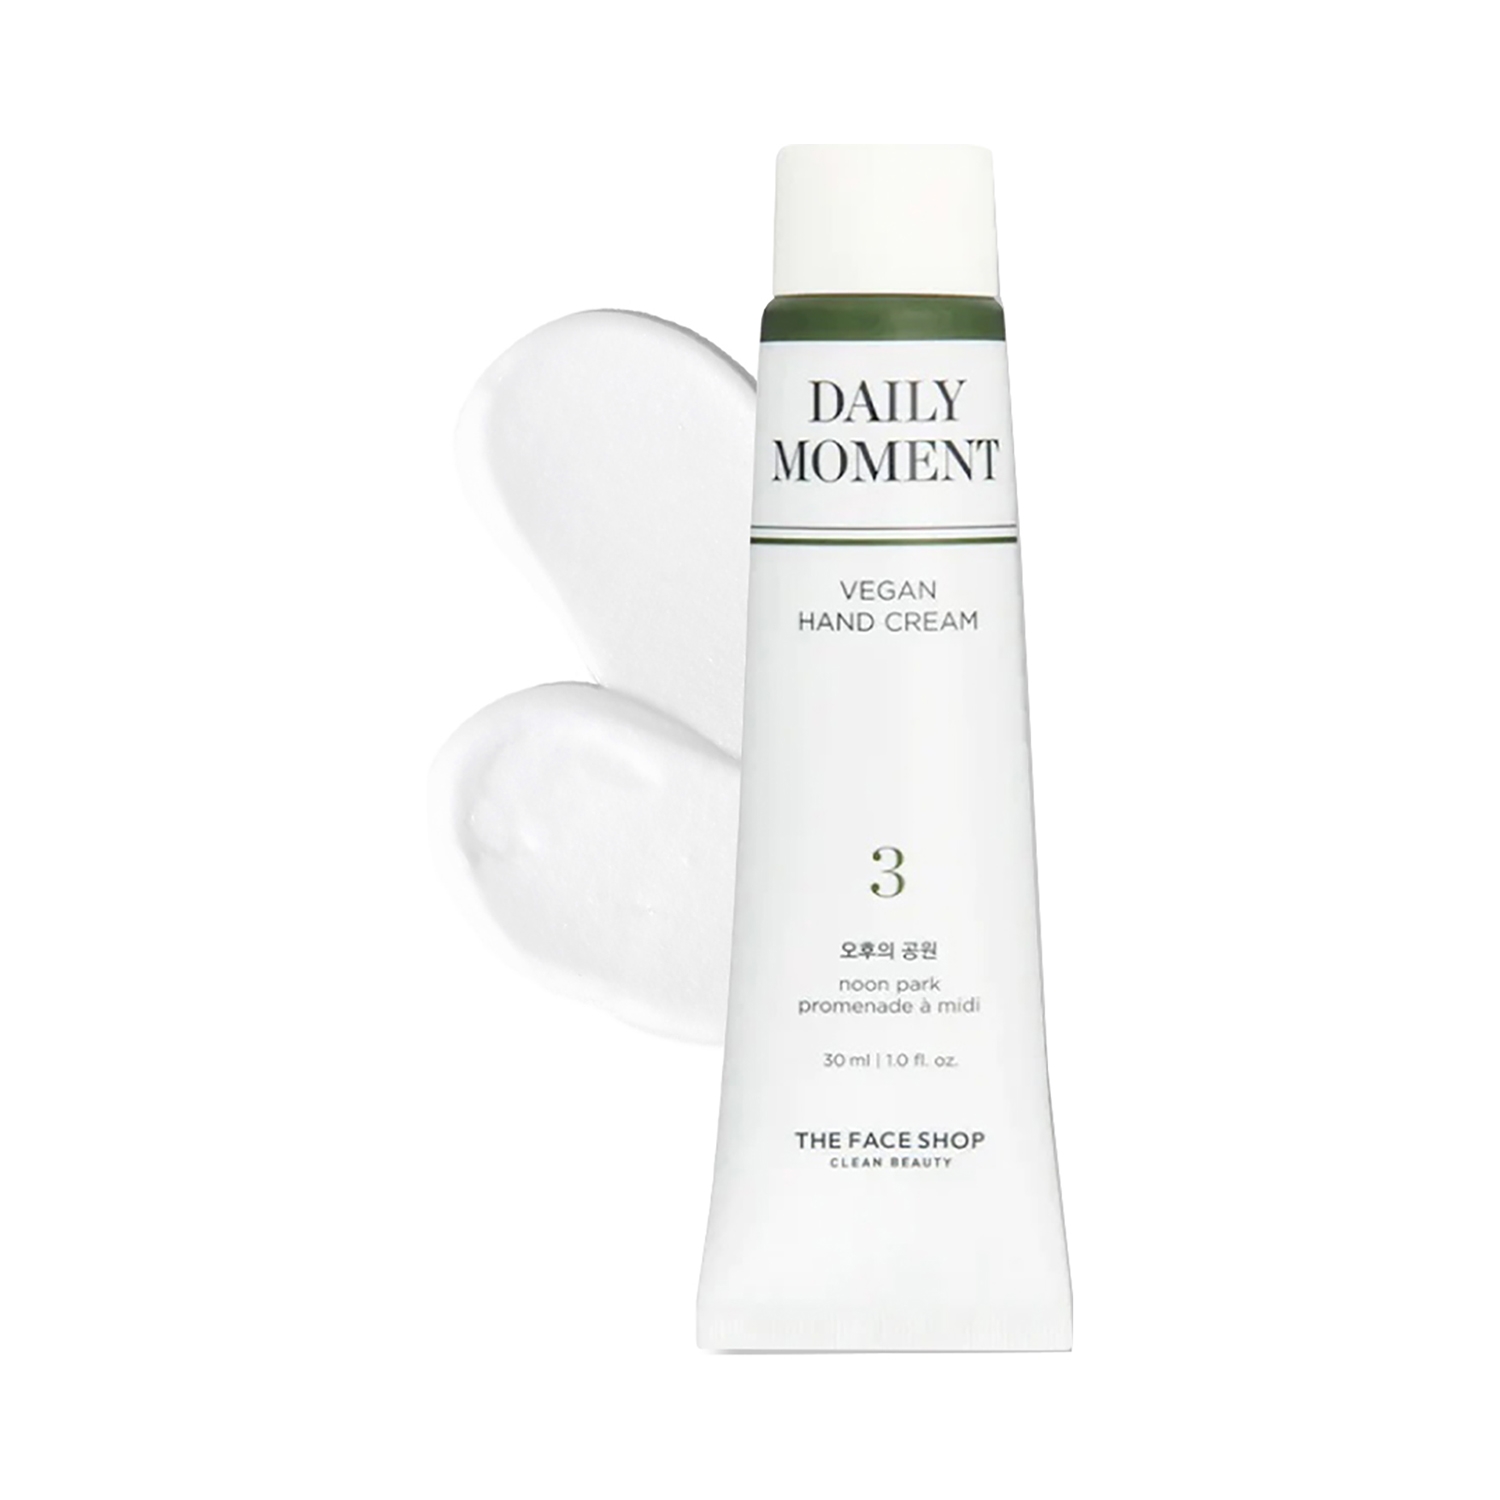 The Face Shop | The Face Shop Daily Moment 03 Noon Park Vegan Hand Cream (30ml)